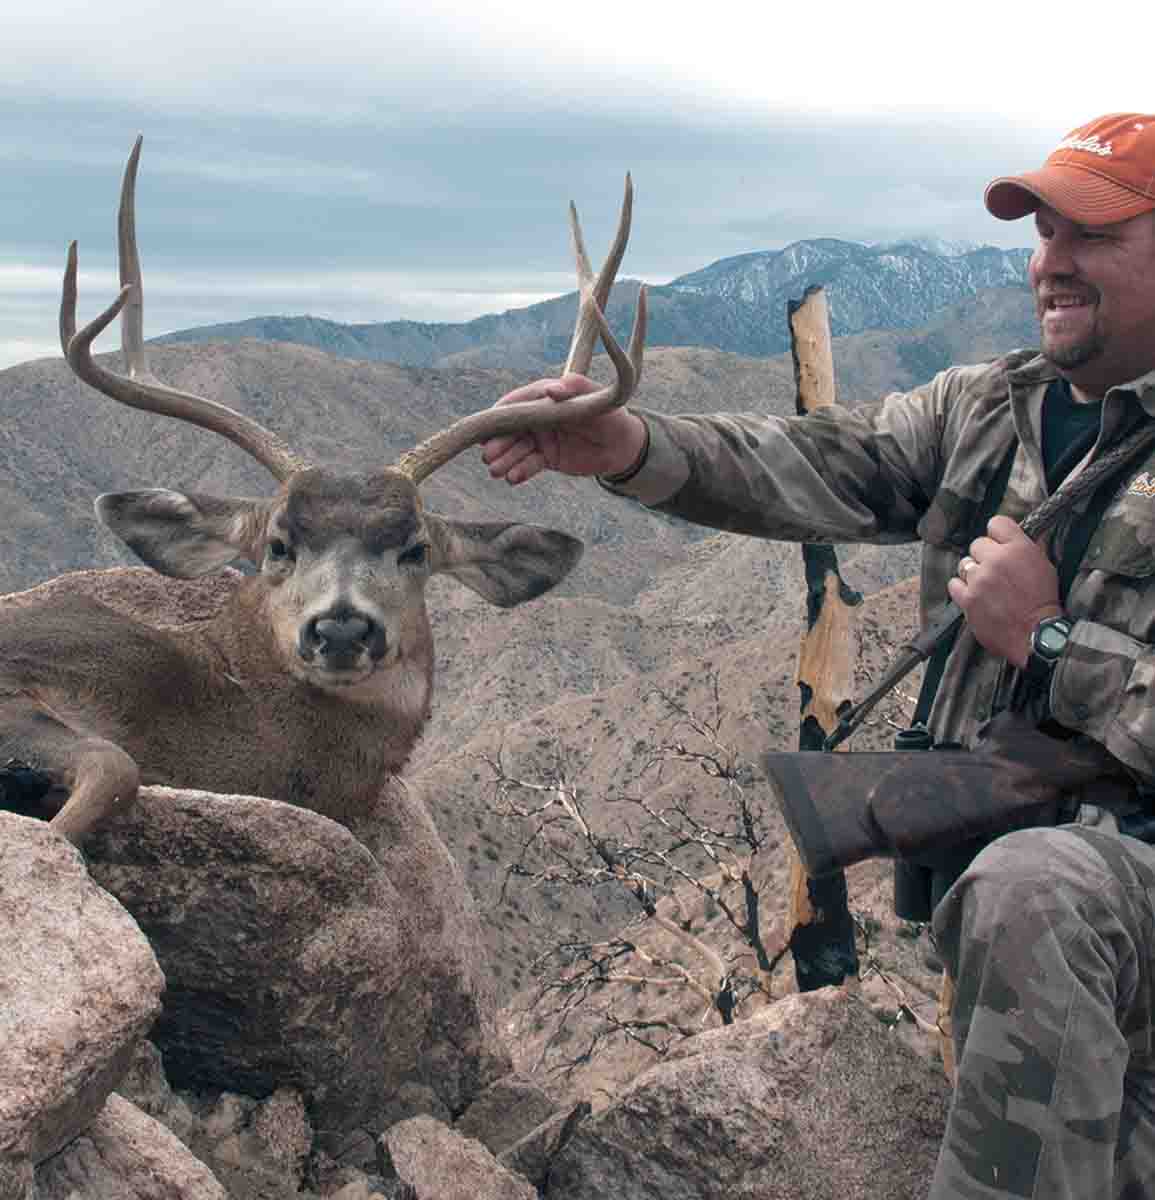 Shot with a 6.5 Remington Magnum and a Nosler 120-grain Ballistic Tip handloaded to nearly 3,300 fps, this old mule deer buck – the “California” subspecies – was hunted in high-elevation, fire-scorched desert mountains.